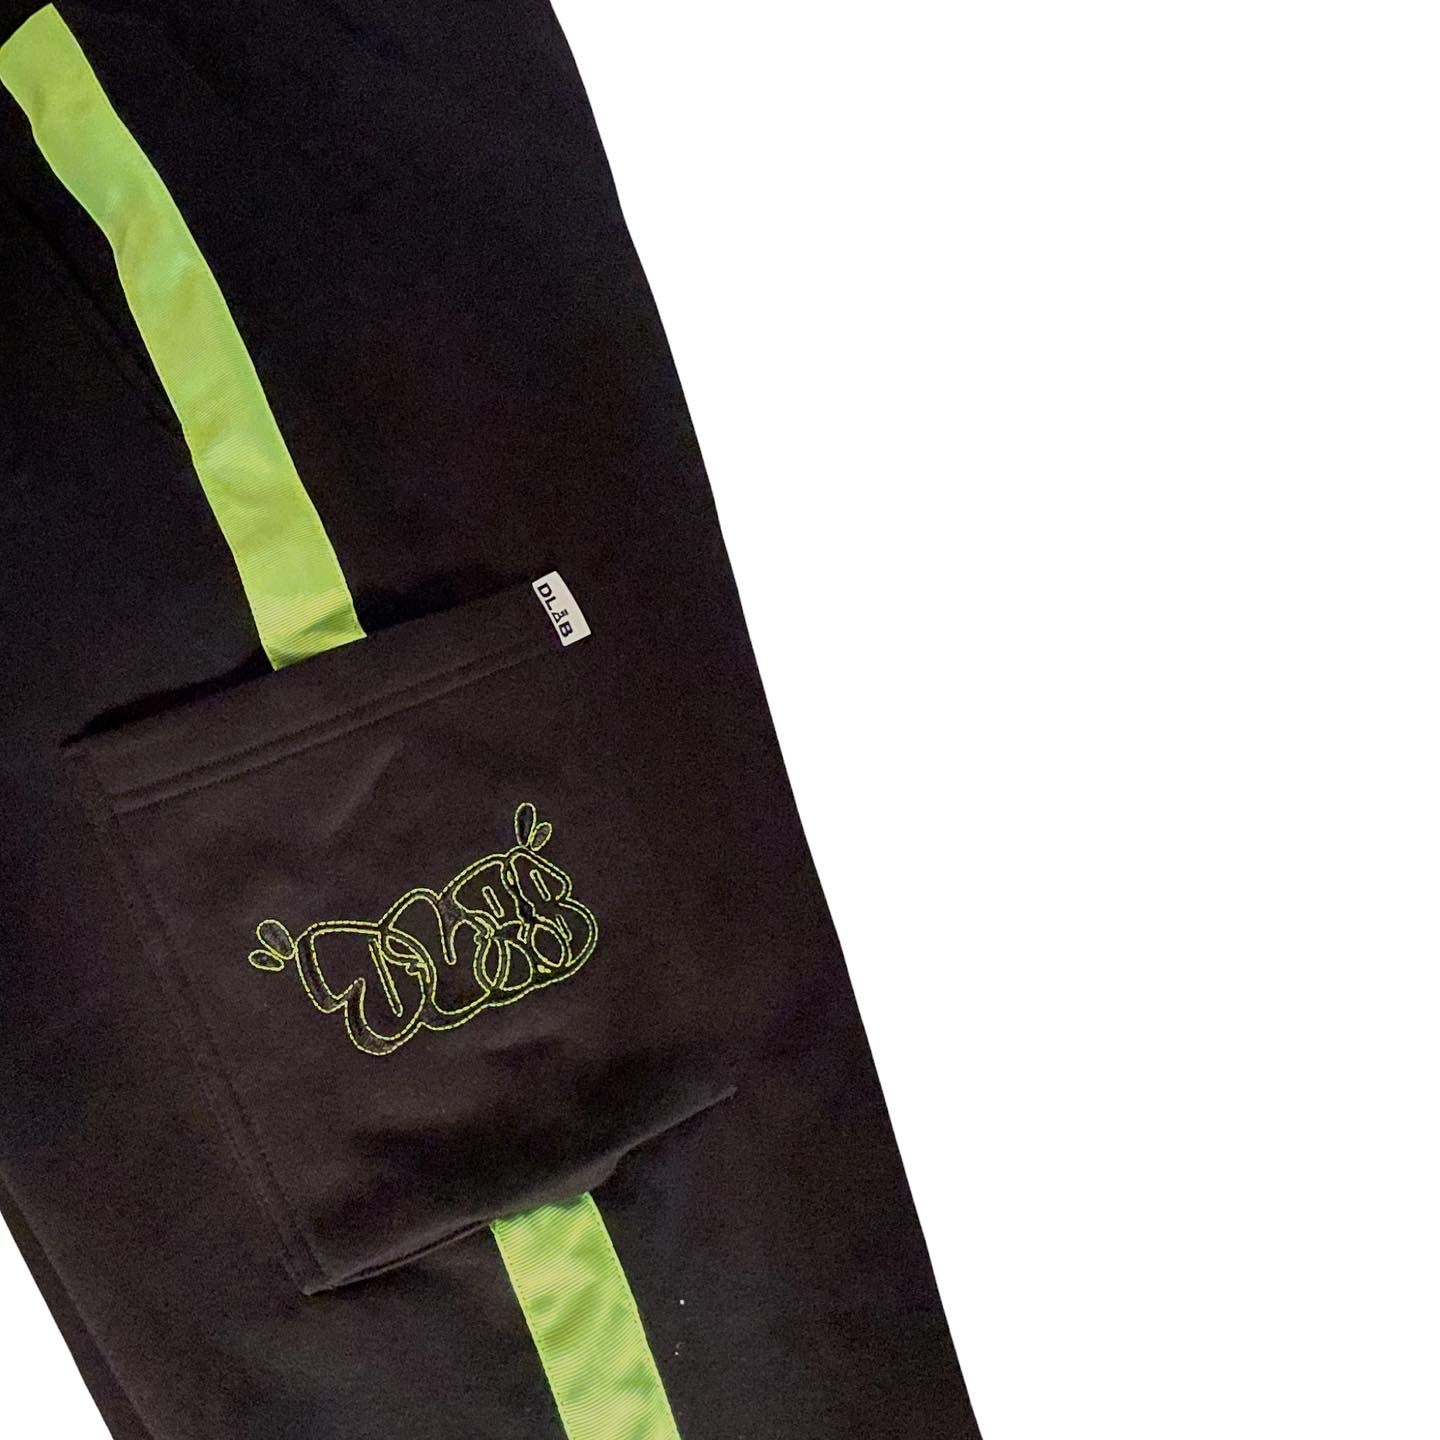 Dlab “ThrowUP” Joggers